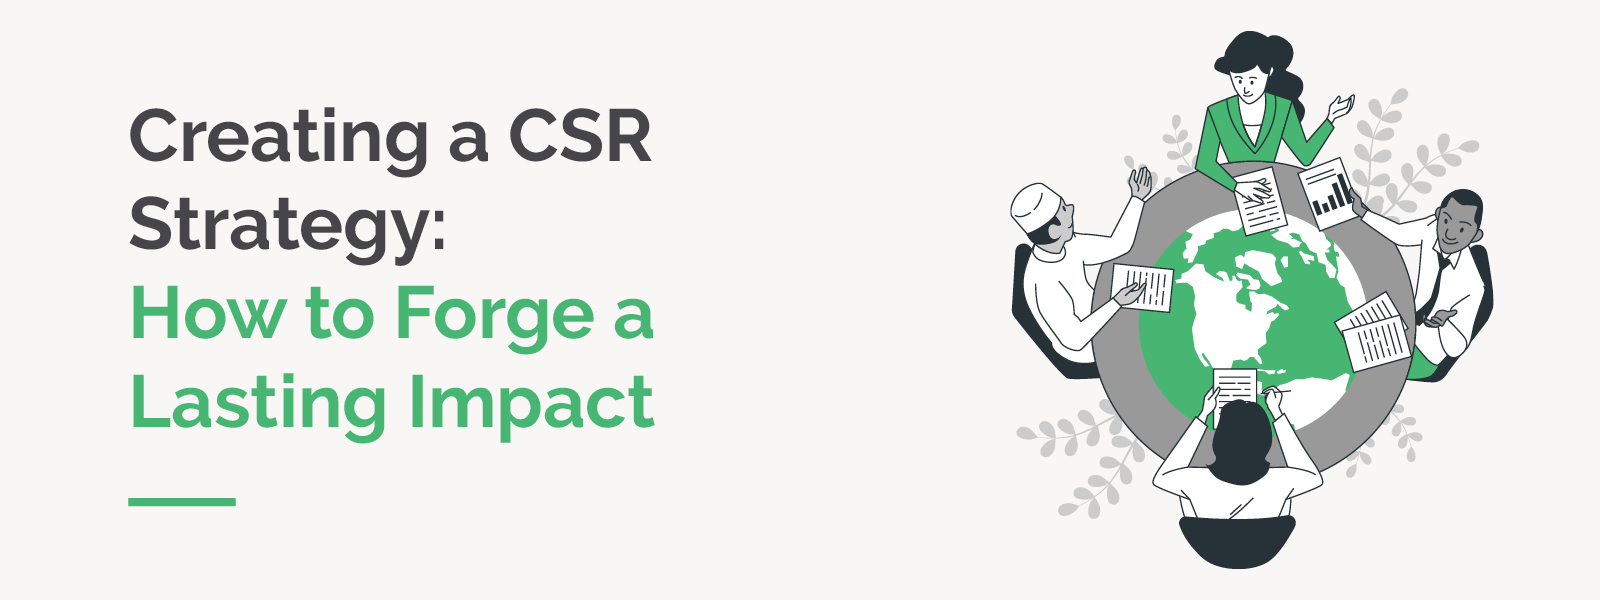 In this guide, we’ll walk through how your company can create a CSR strategy that engages employees and generates a lasting impact on society.